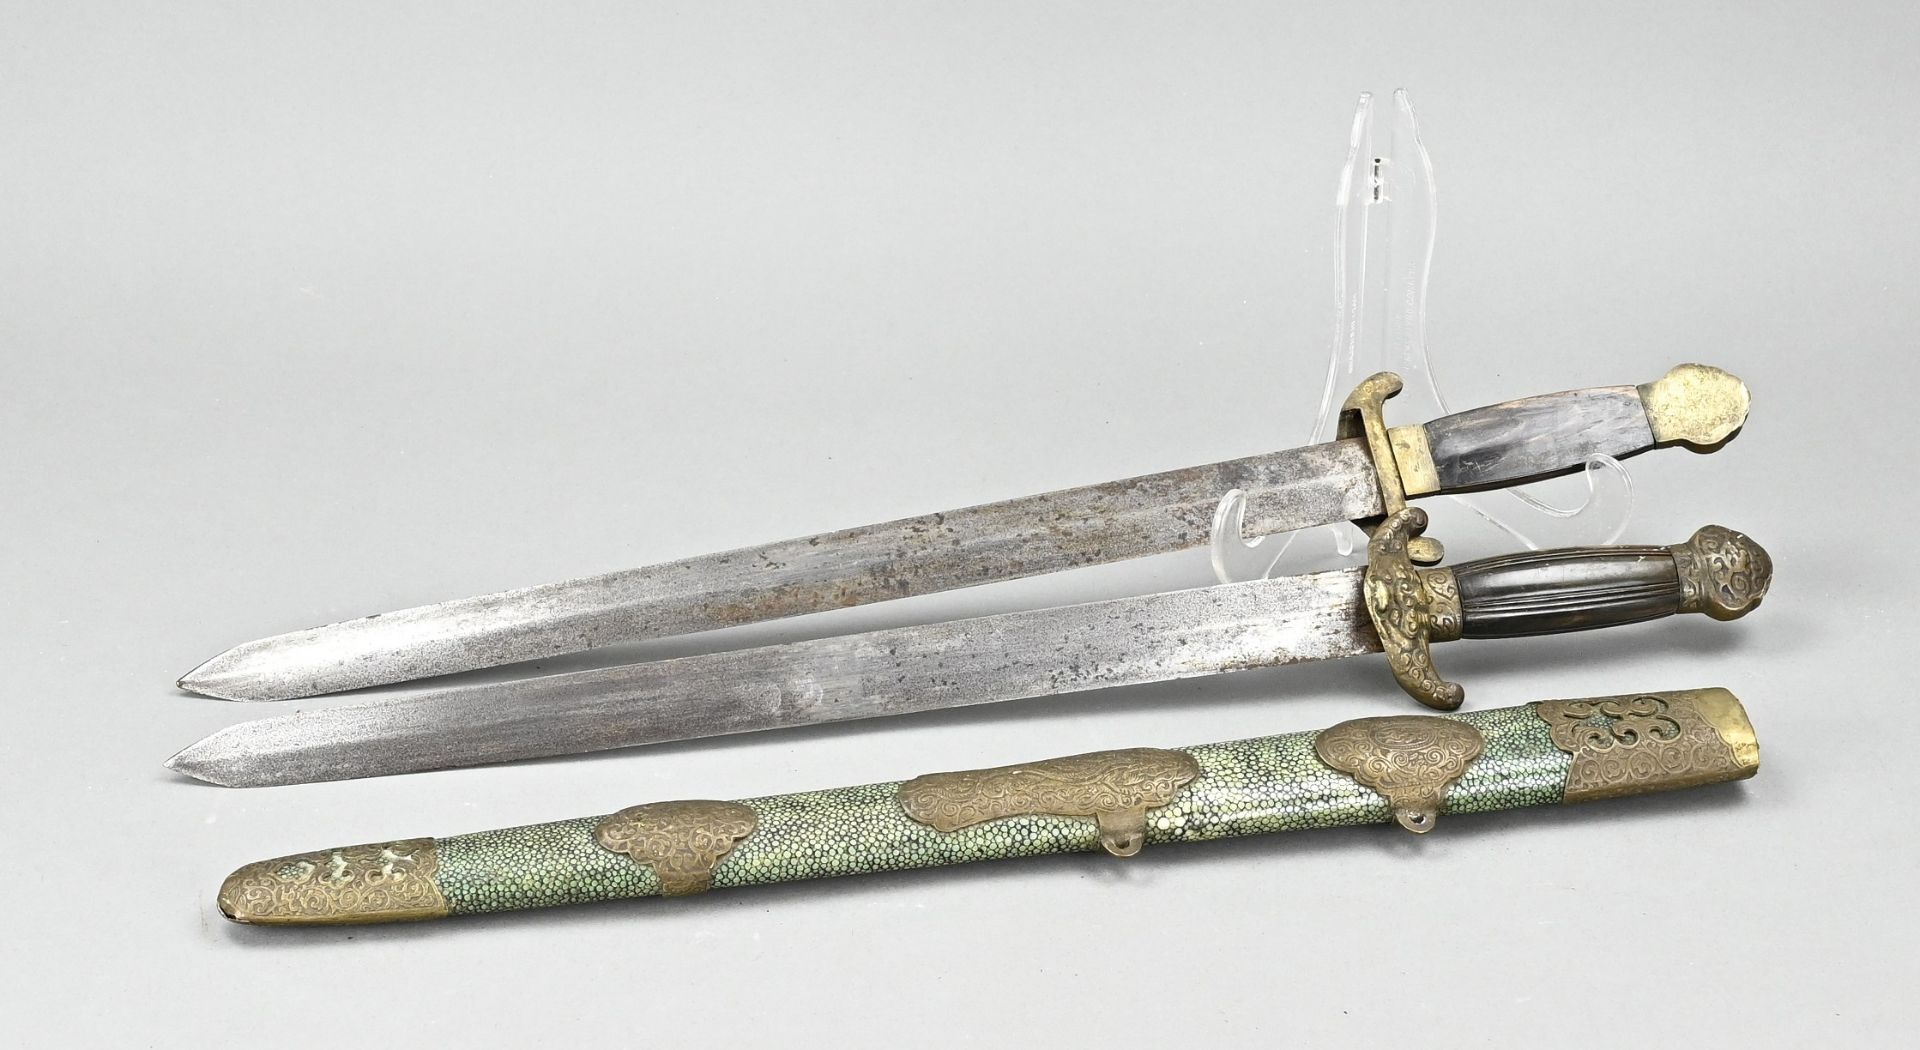 Rare Chinese/Japanese double sword